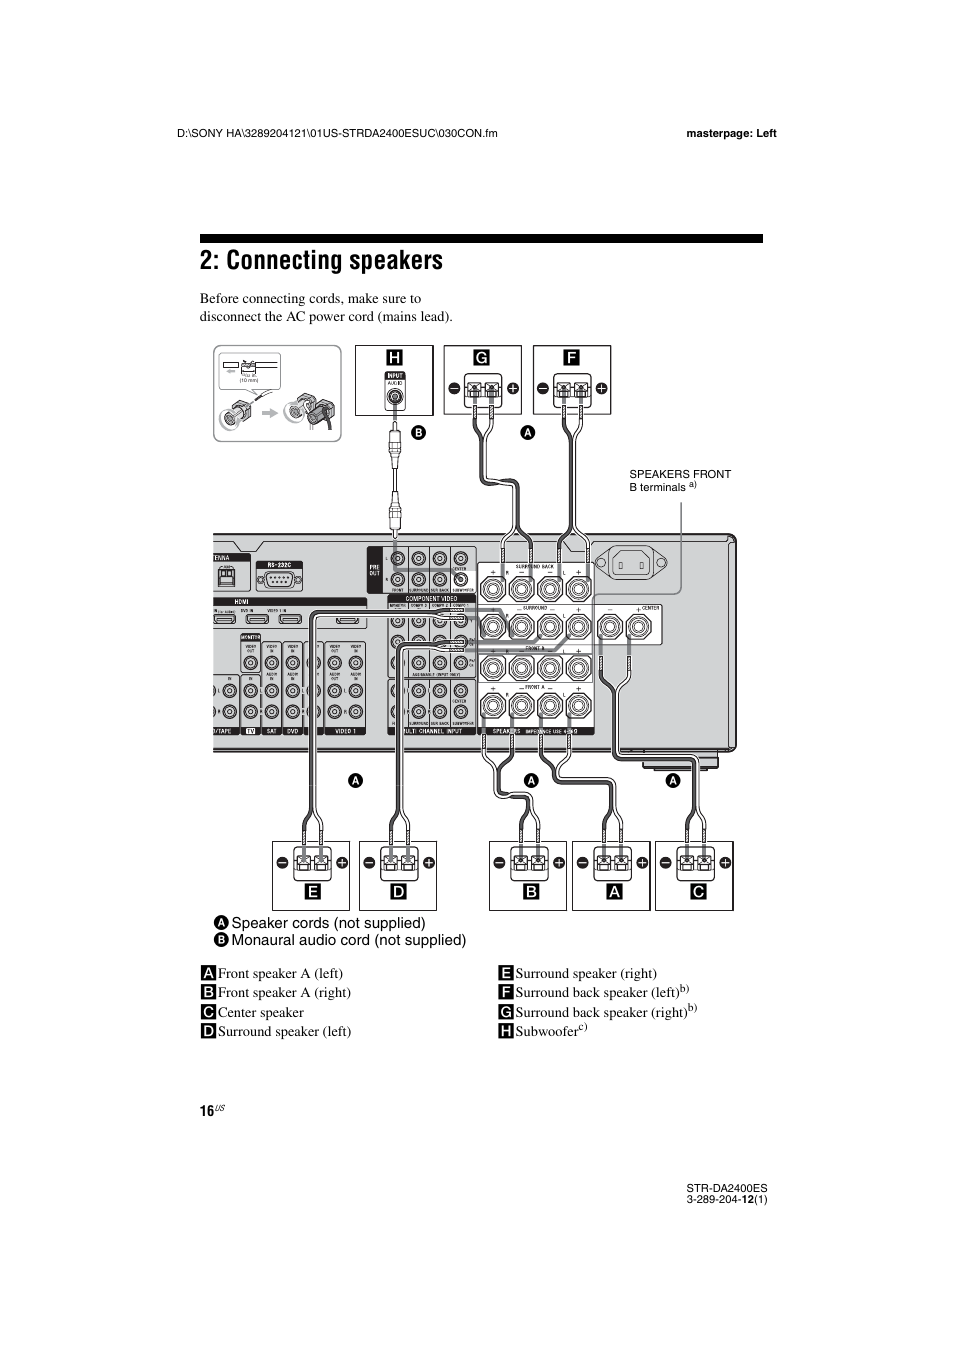 Connecting speakers | Sony 3-289-204-12(1) User Manual | Page 16 / 140